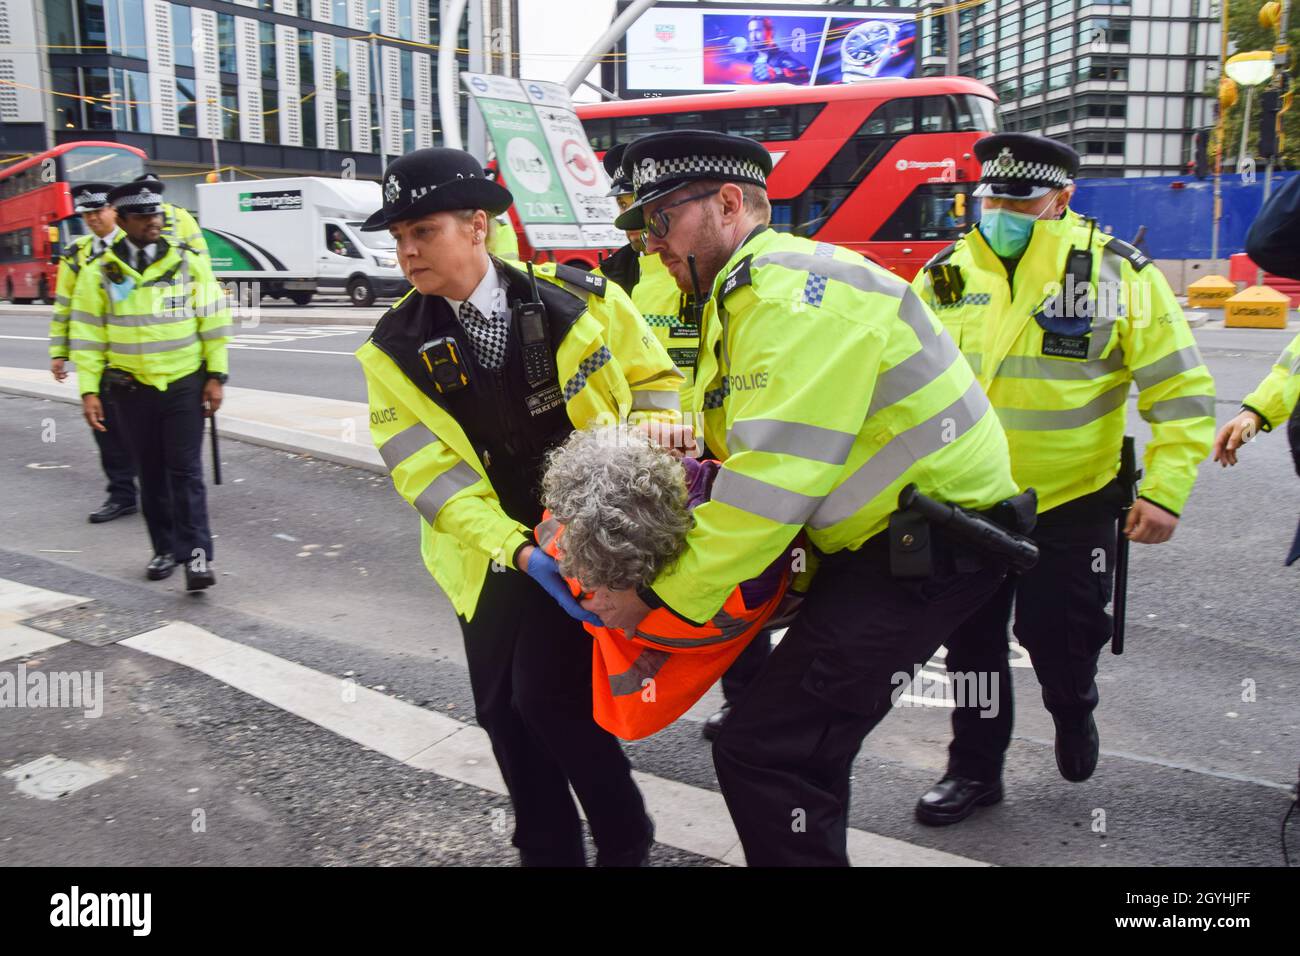 London, United Kingdom. 8th Oct, 2021. Police remove and arrest Insulate Britain protesters who glued themselves to the road at the Old Street roundabout. Insulate Britain protesters are demanding that the government insulates all social housing by 2025, and takes responsibility for ensuring that all homes in the UK are more energy-efficient by 2030, as part of wider climate change and decarbonization targets. Credit: Vuk Valcic/Alamy Live News Stock Photo